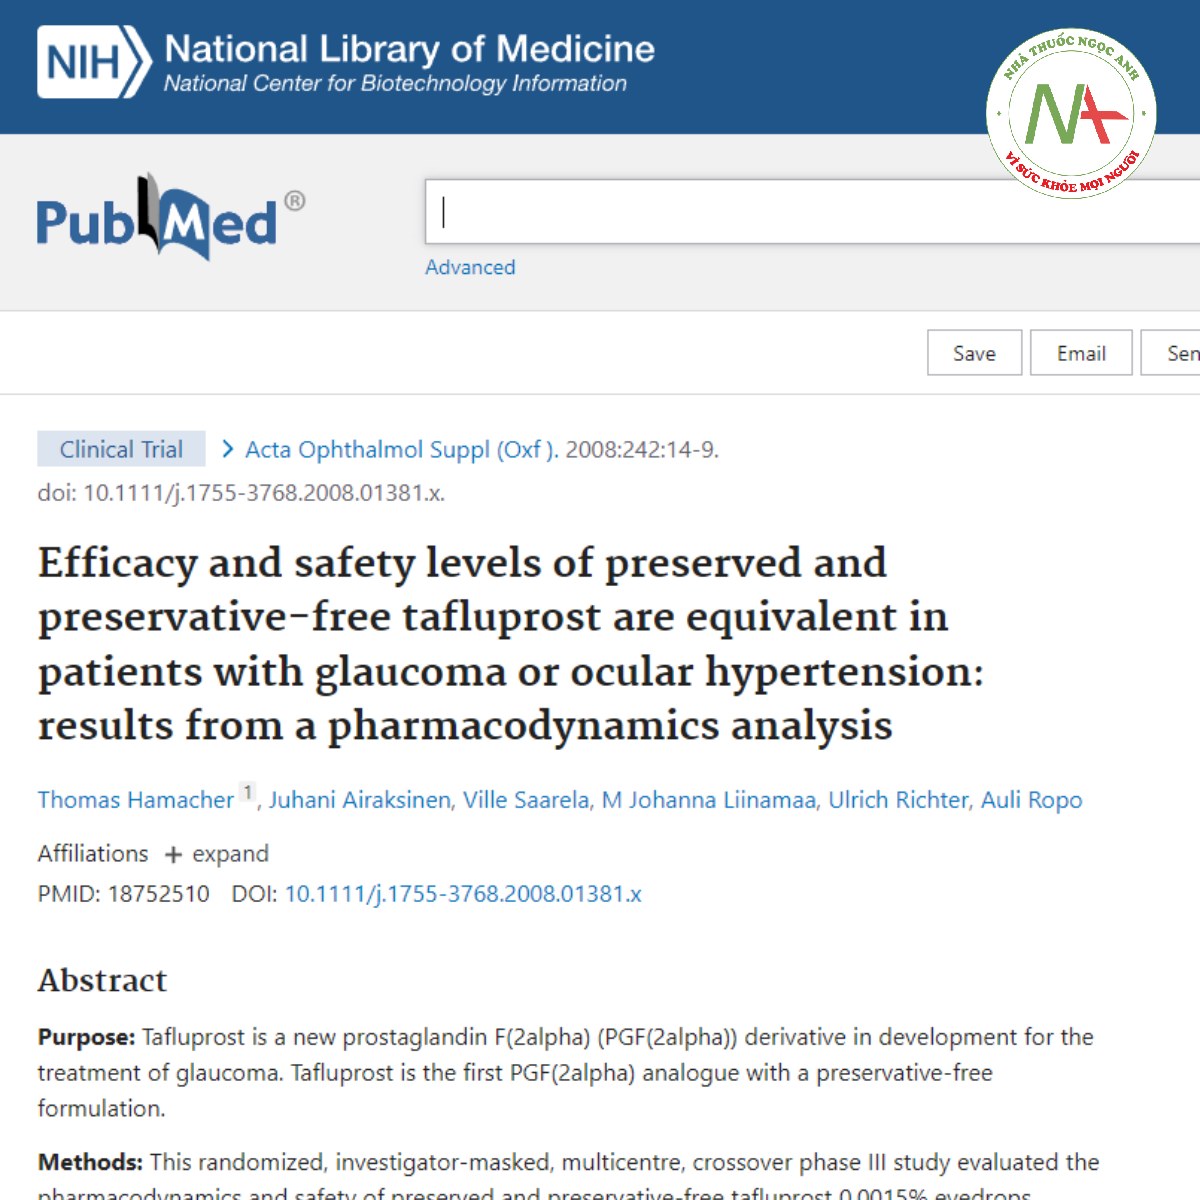 Efficacy and safety levels of preserved and preservative-free tafluprost are equivalent in patients with glaucoma or ocular hypertension_ results from a pharmacodynamics analysis